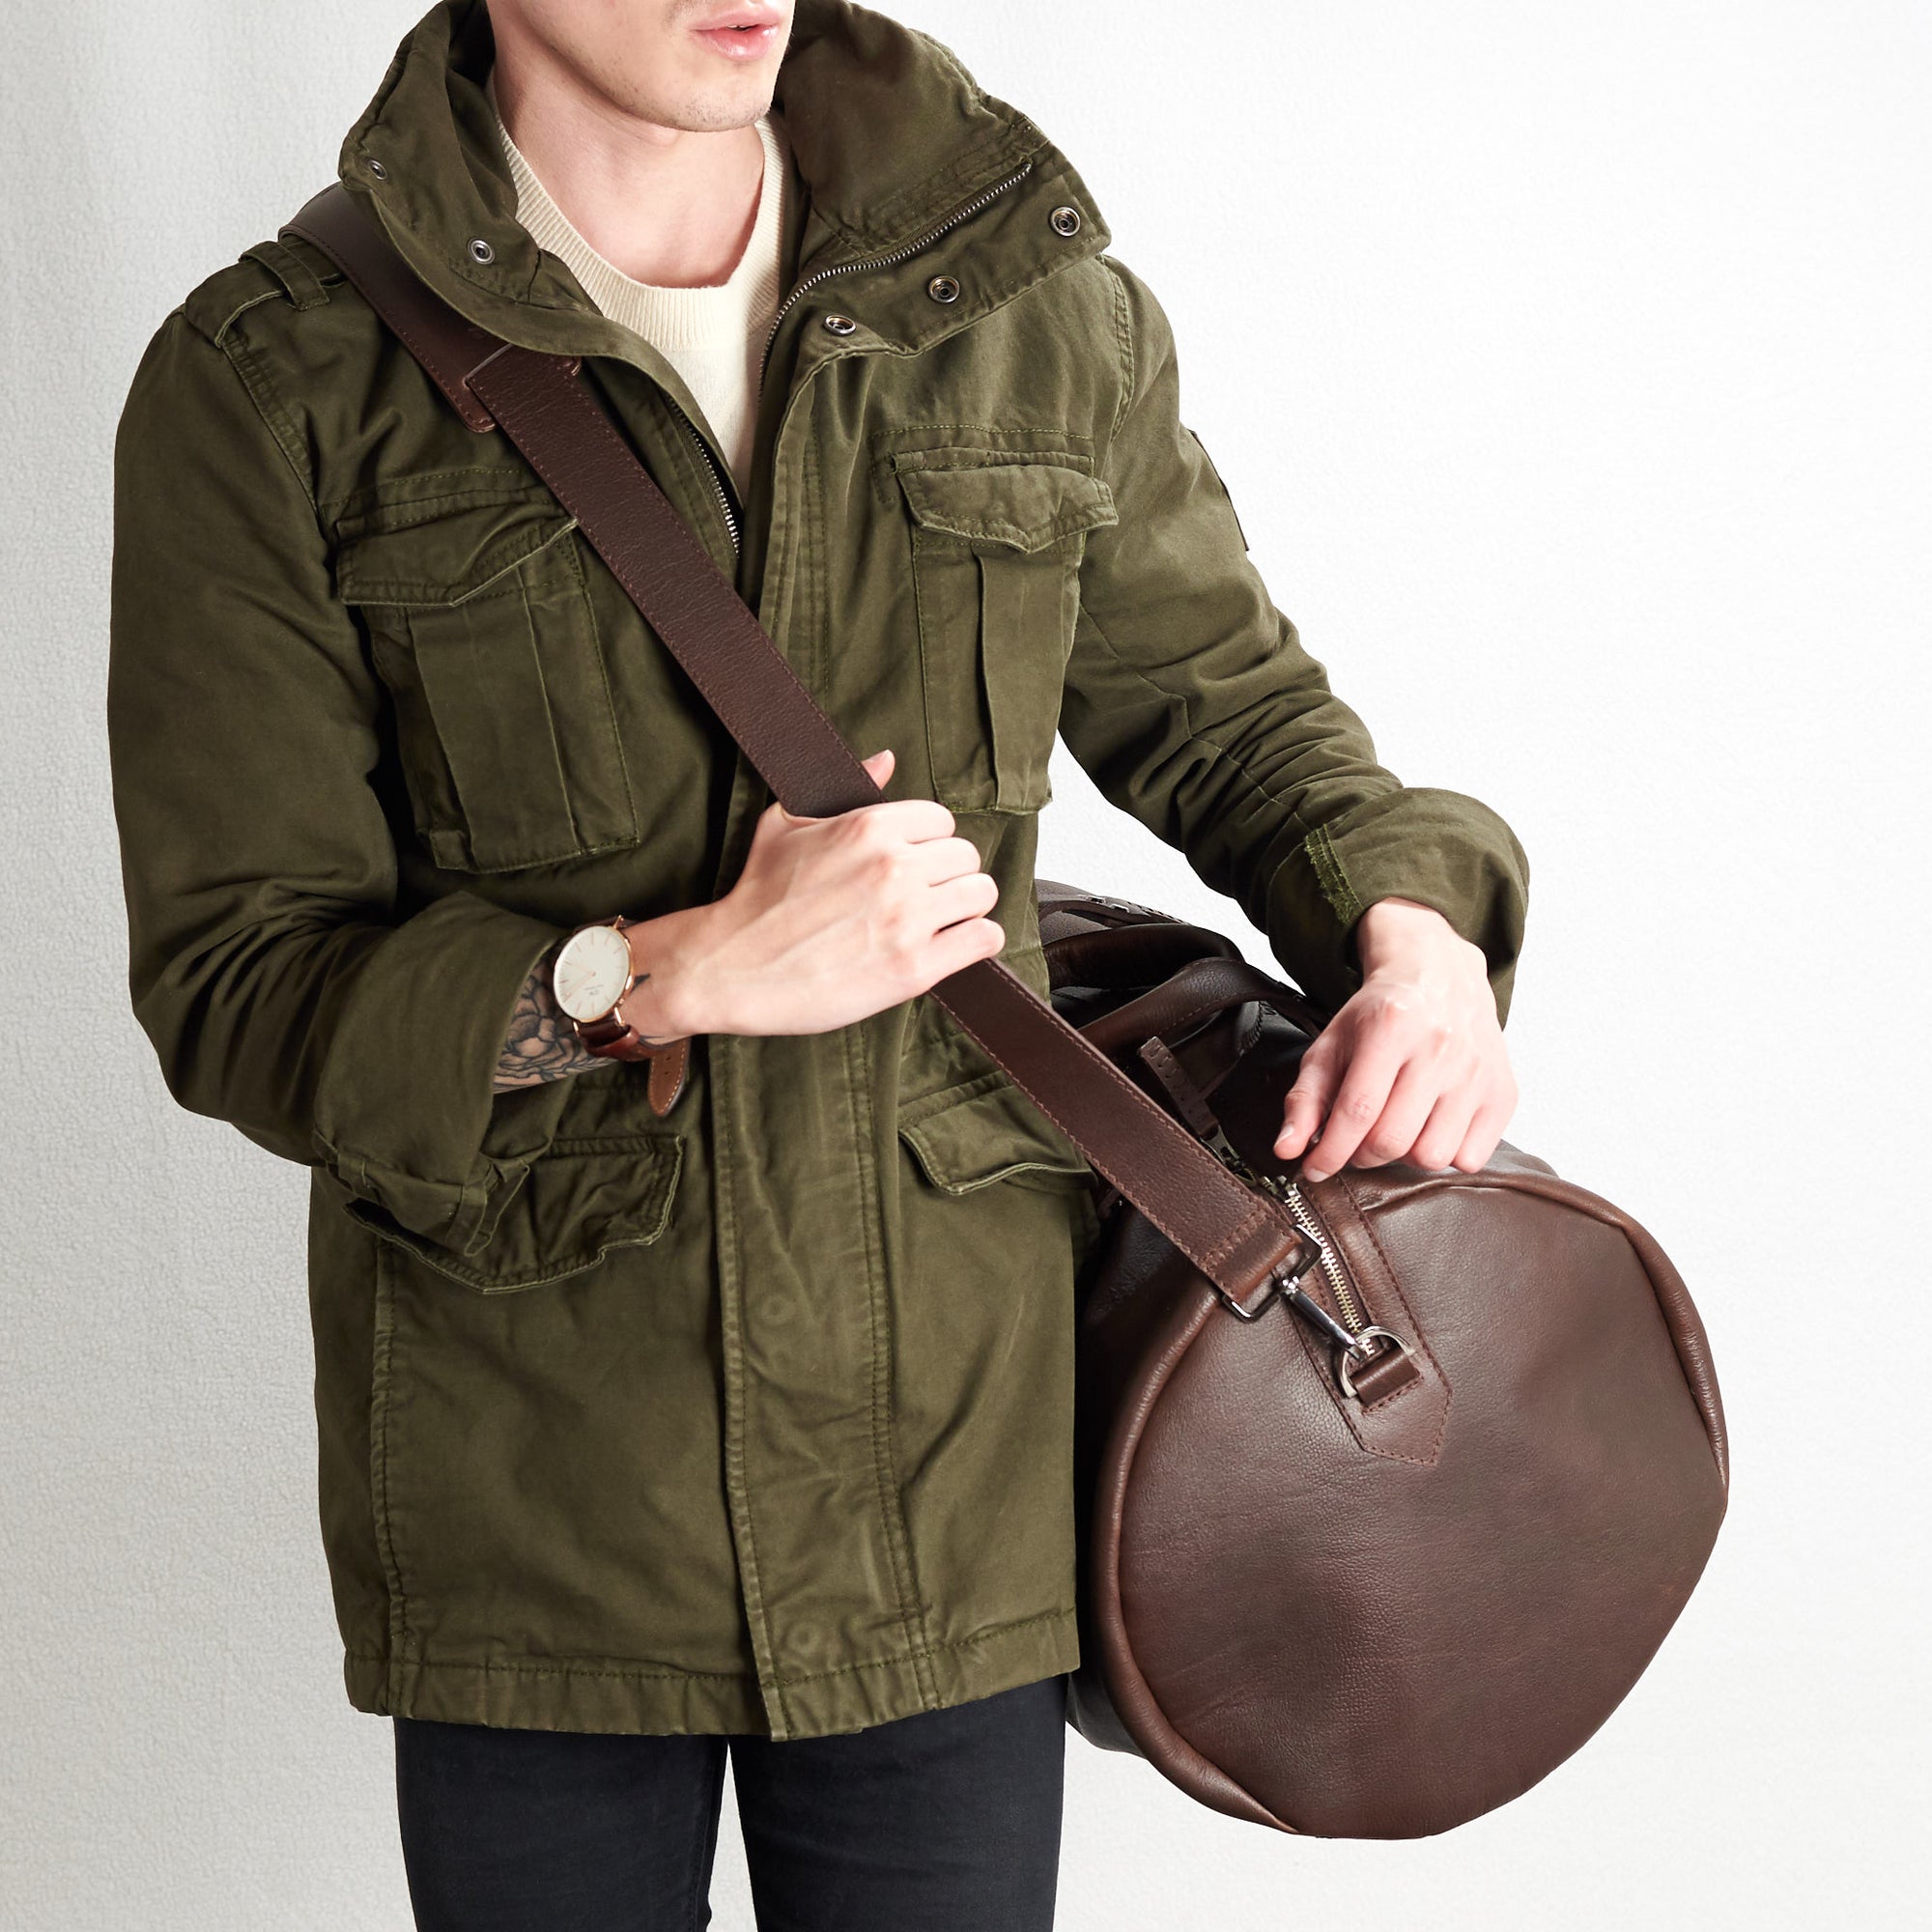 Shoulder strap with duffle bag on. Substantial dark brown duffle bag by Capra Leather.